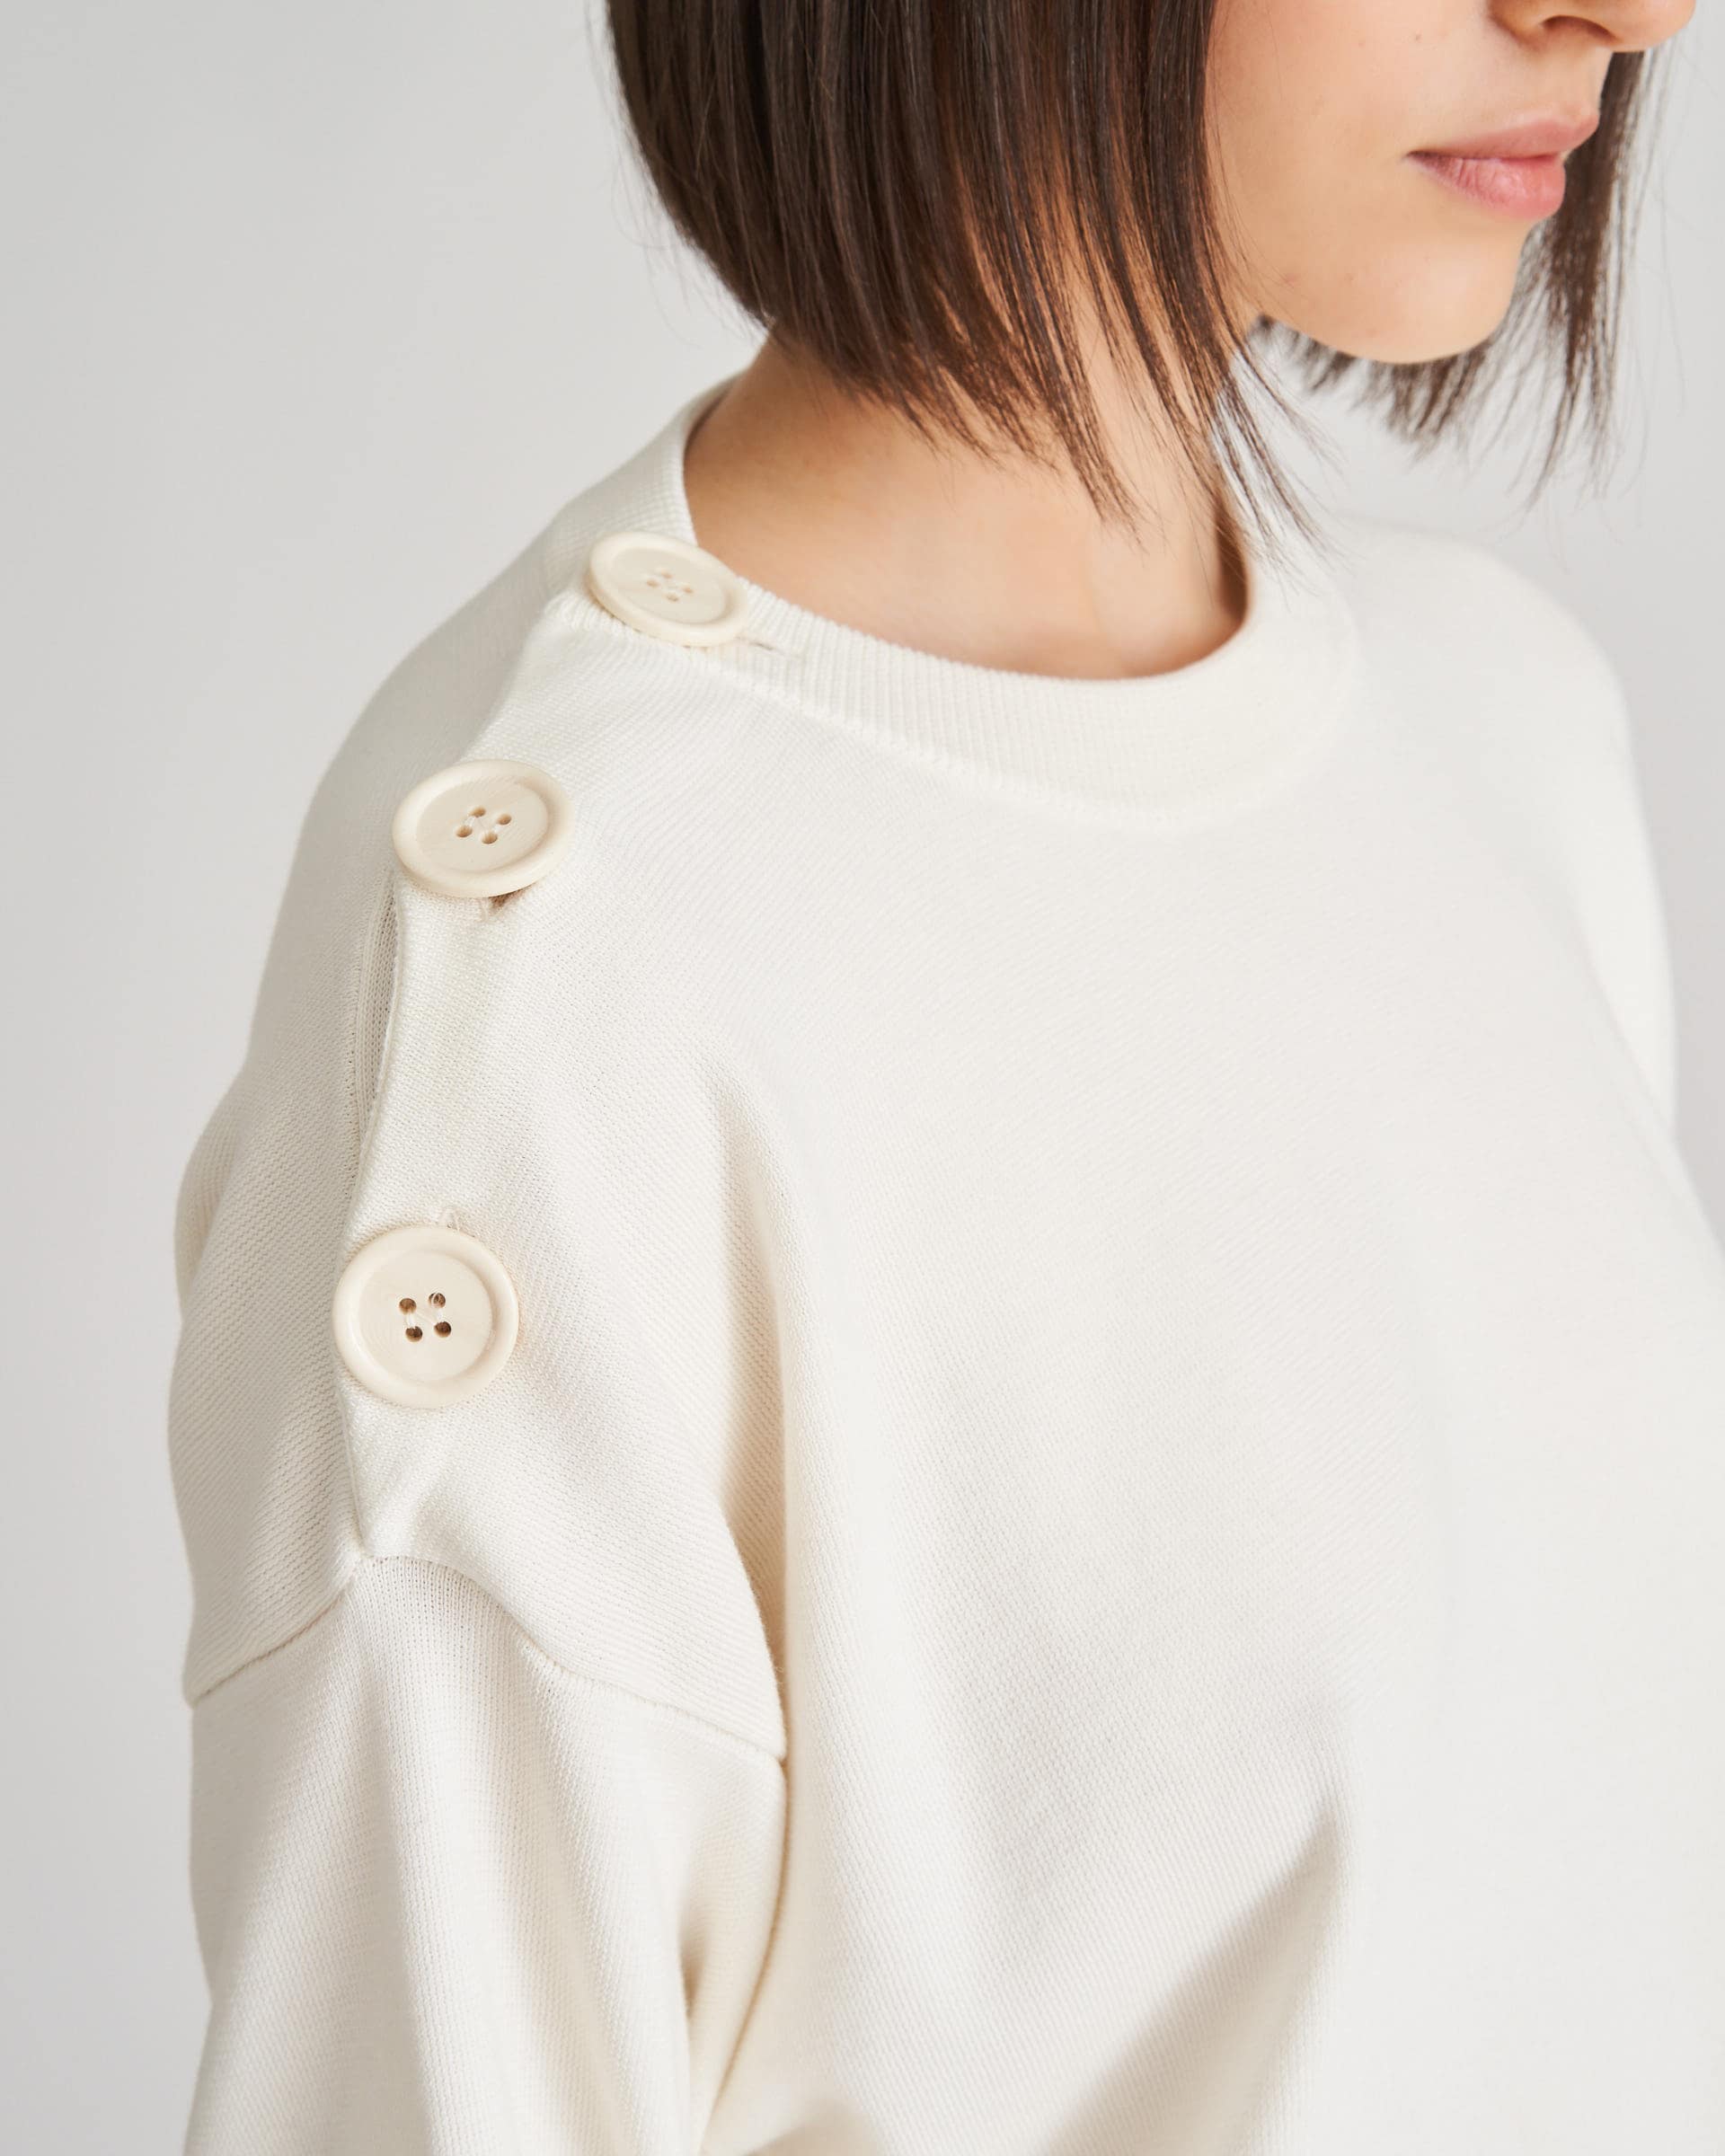 The Market Store | Crew Neck Sleeve Buttons On Shoulder